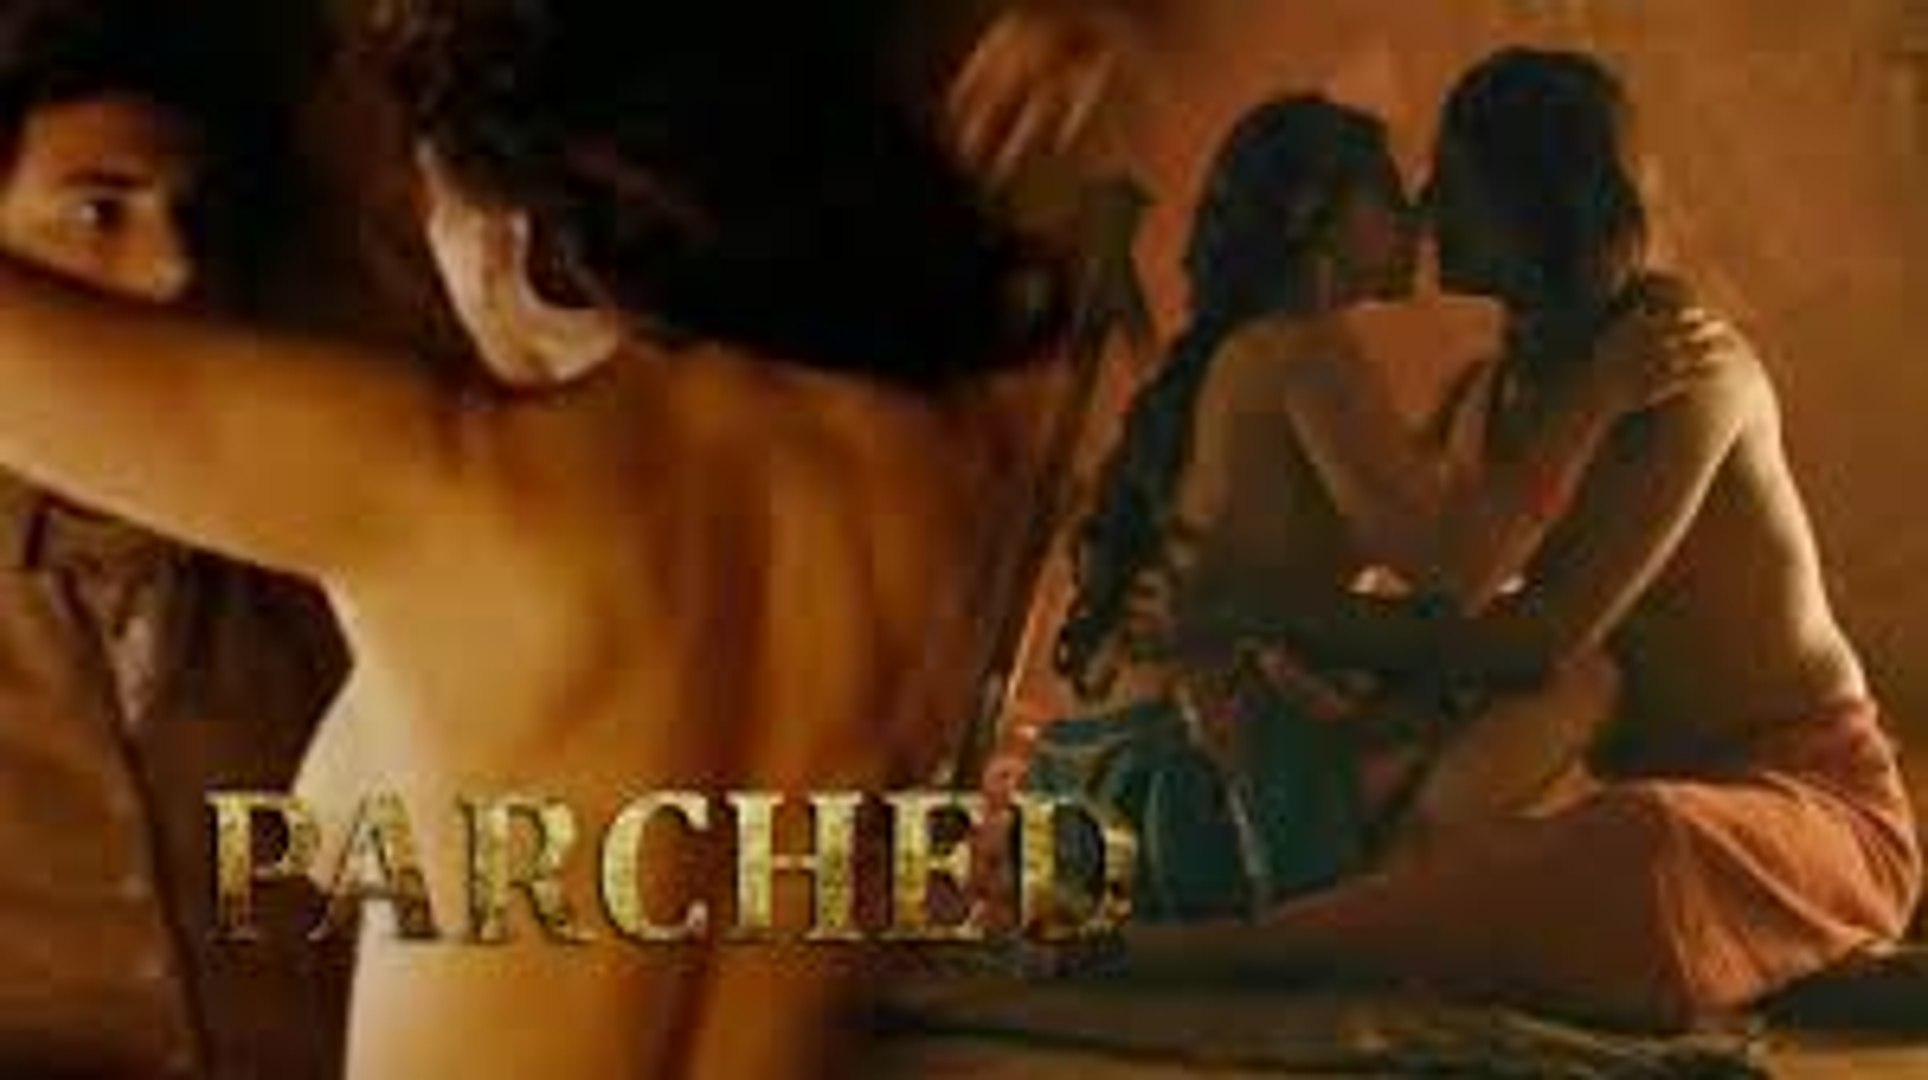 Tamil Dubbed Hollywood Sex Ful Movie Download - Parched - UNRATED - Dvd Part-1 - video dailymotion